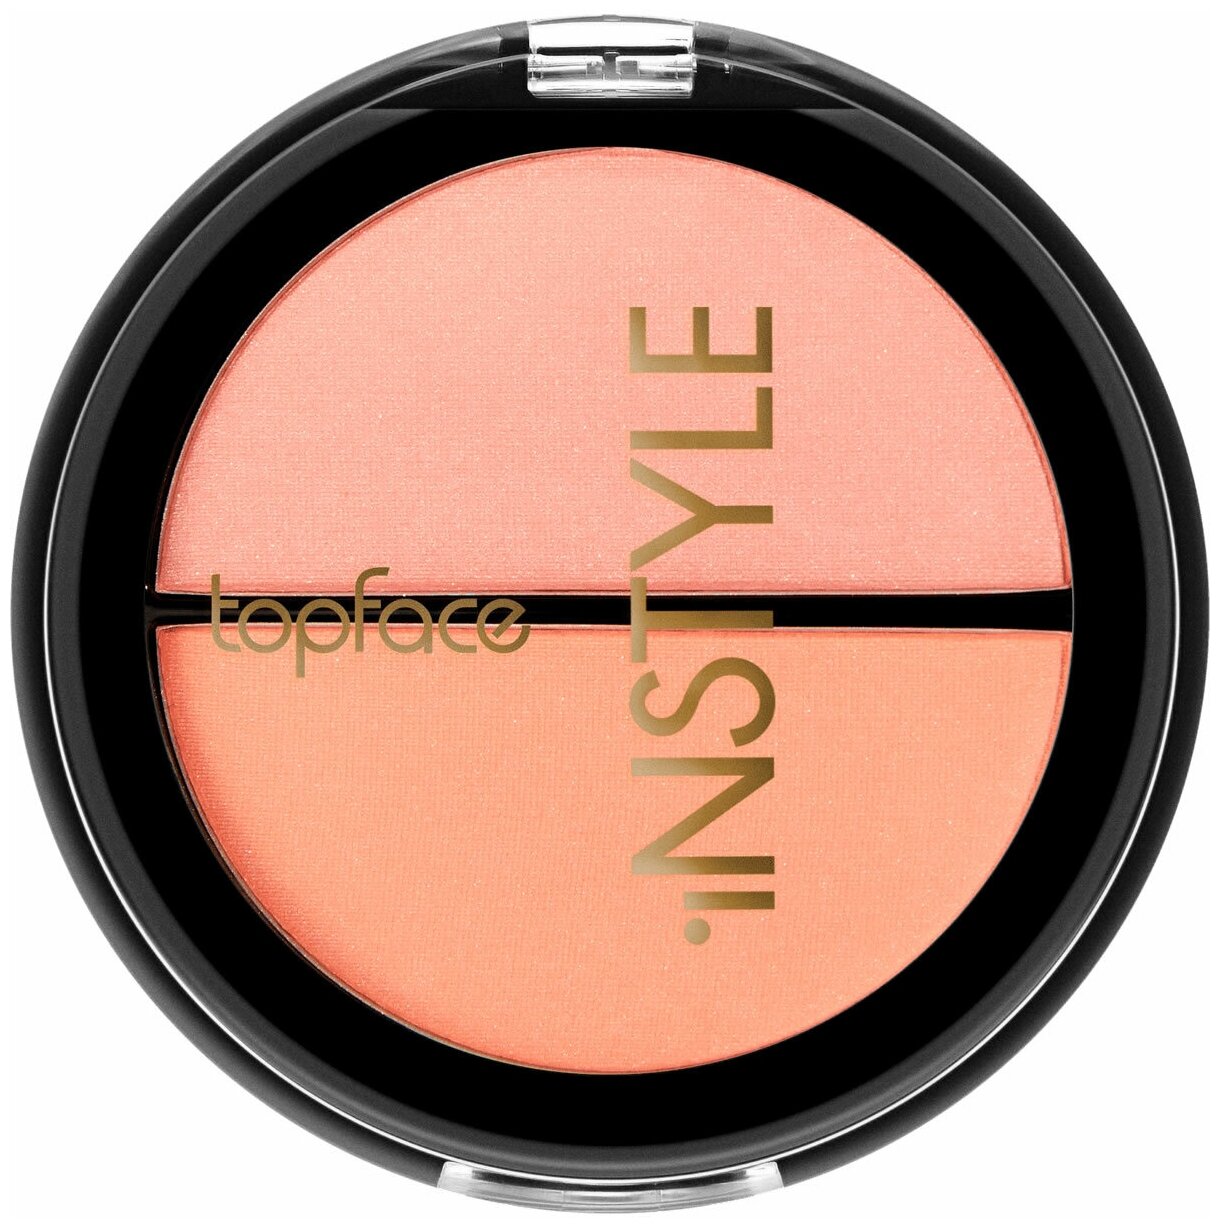 _topface_  instyle "twin blush blush on"_02, , - 7F6011002 .